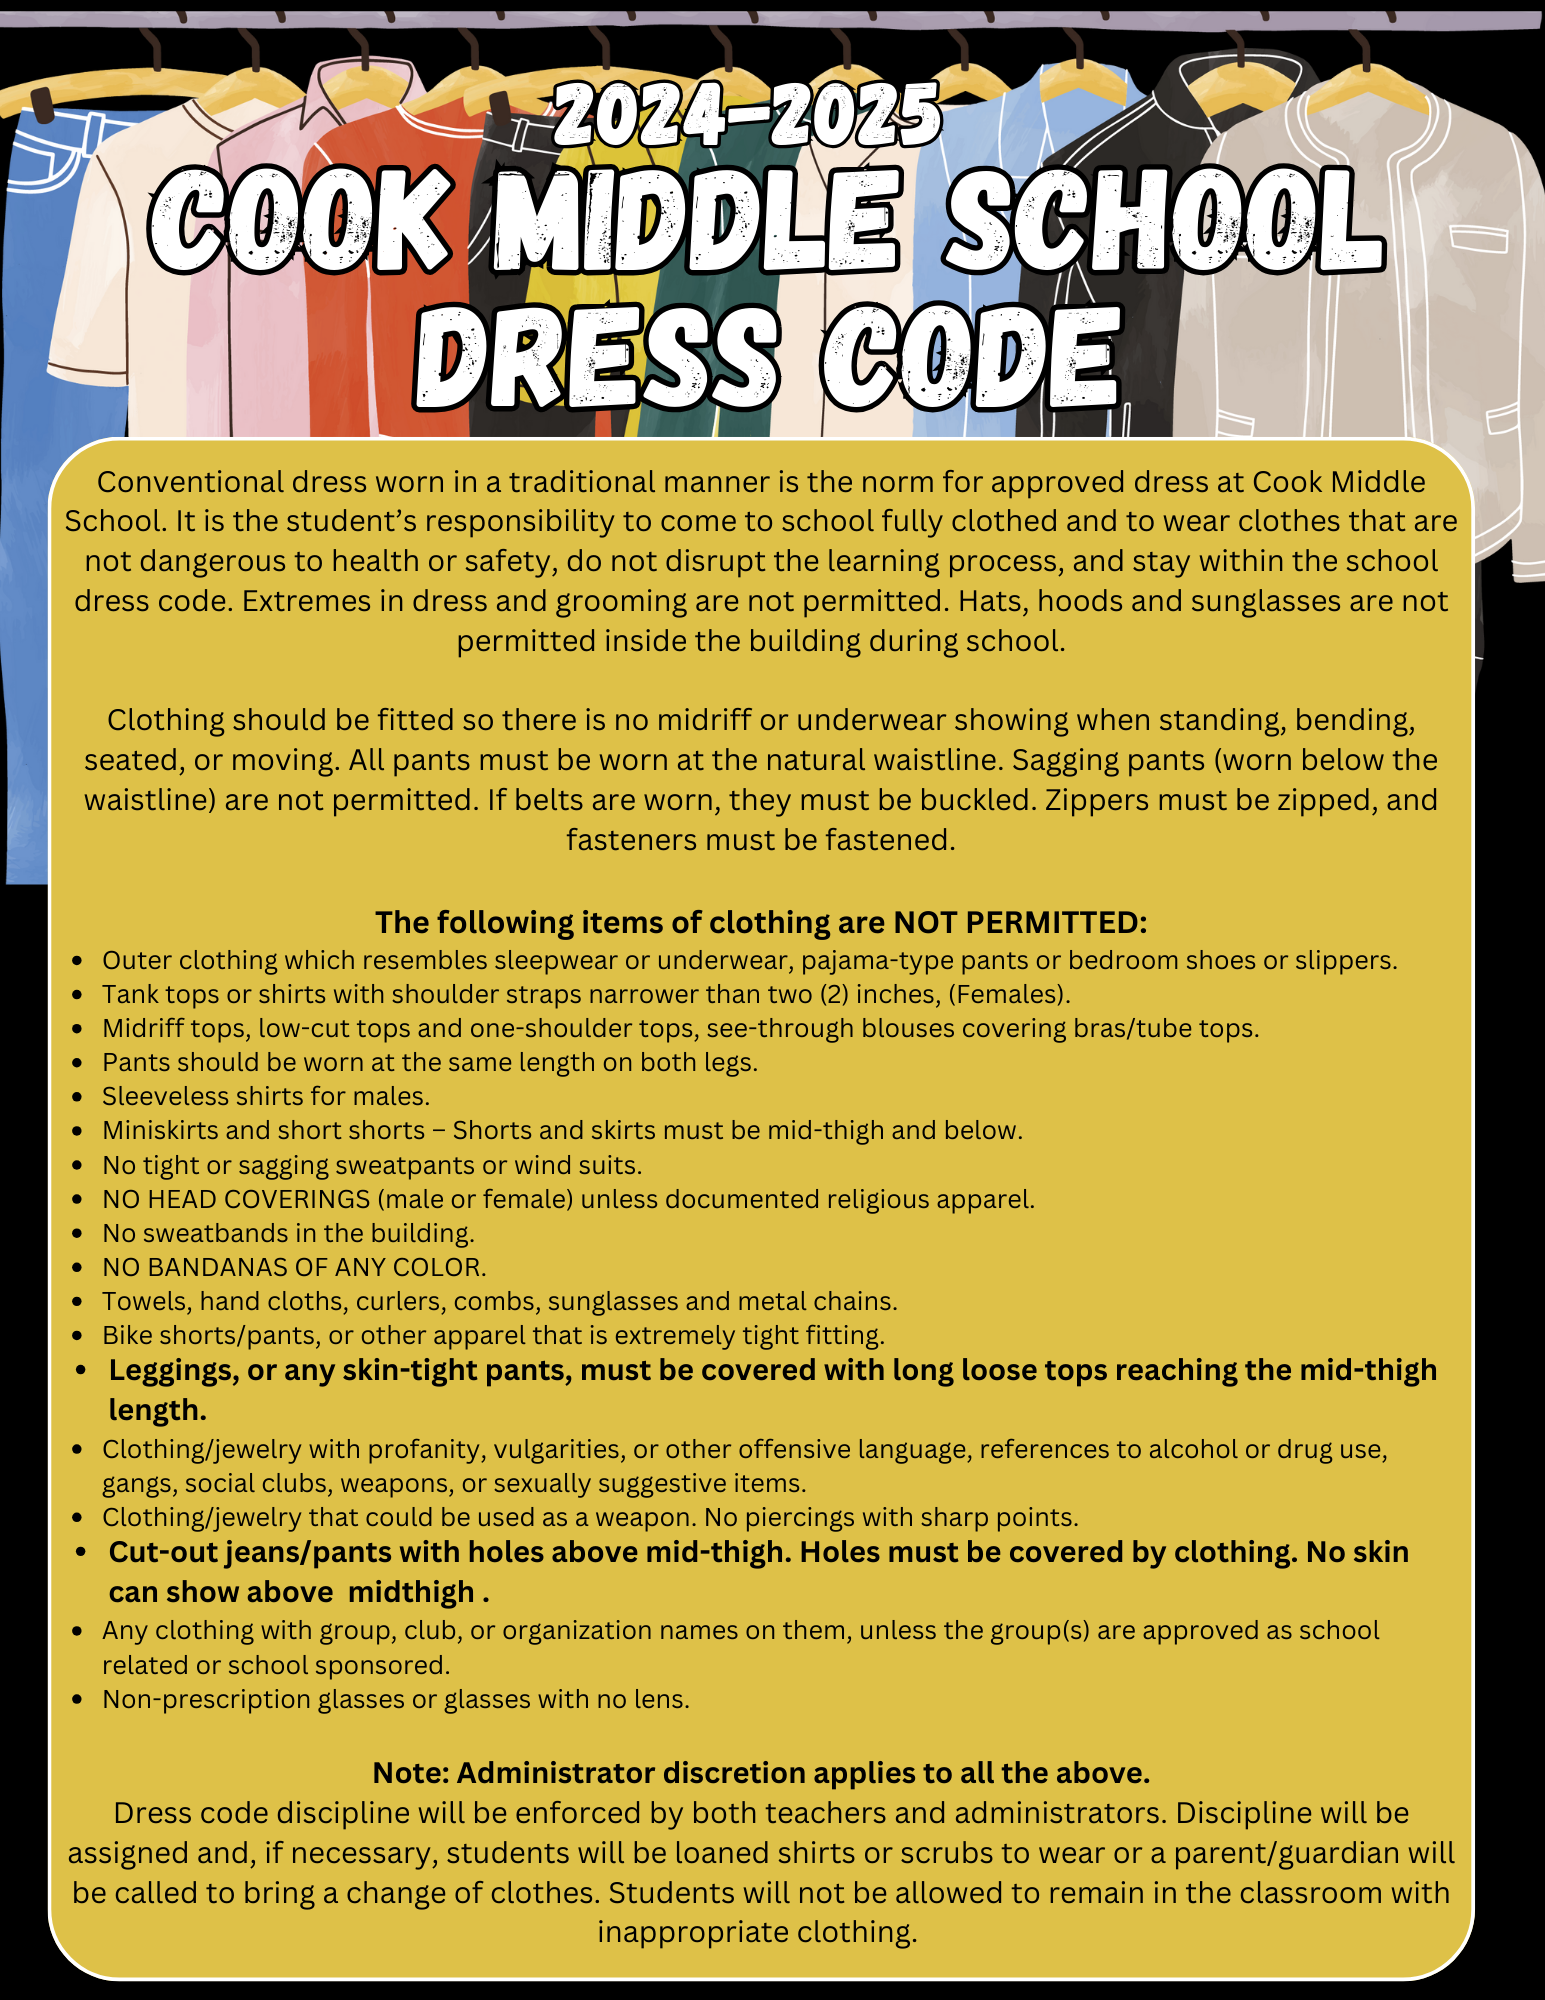 Dress Code Policy